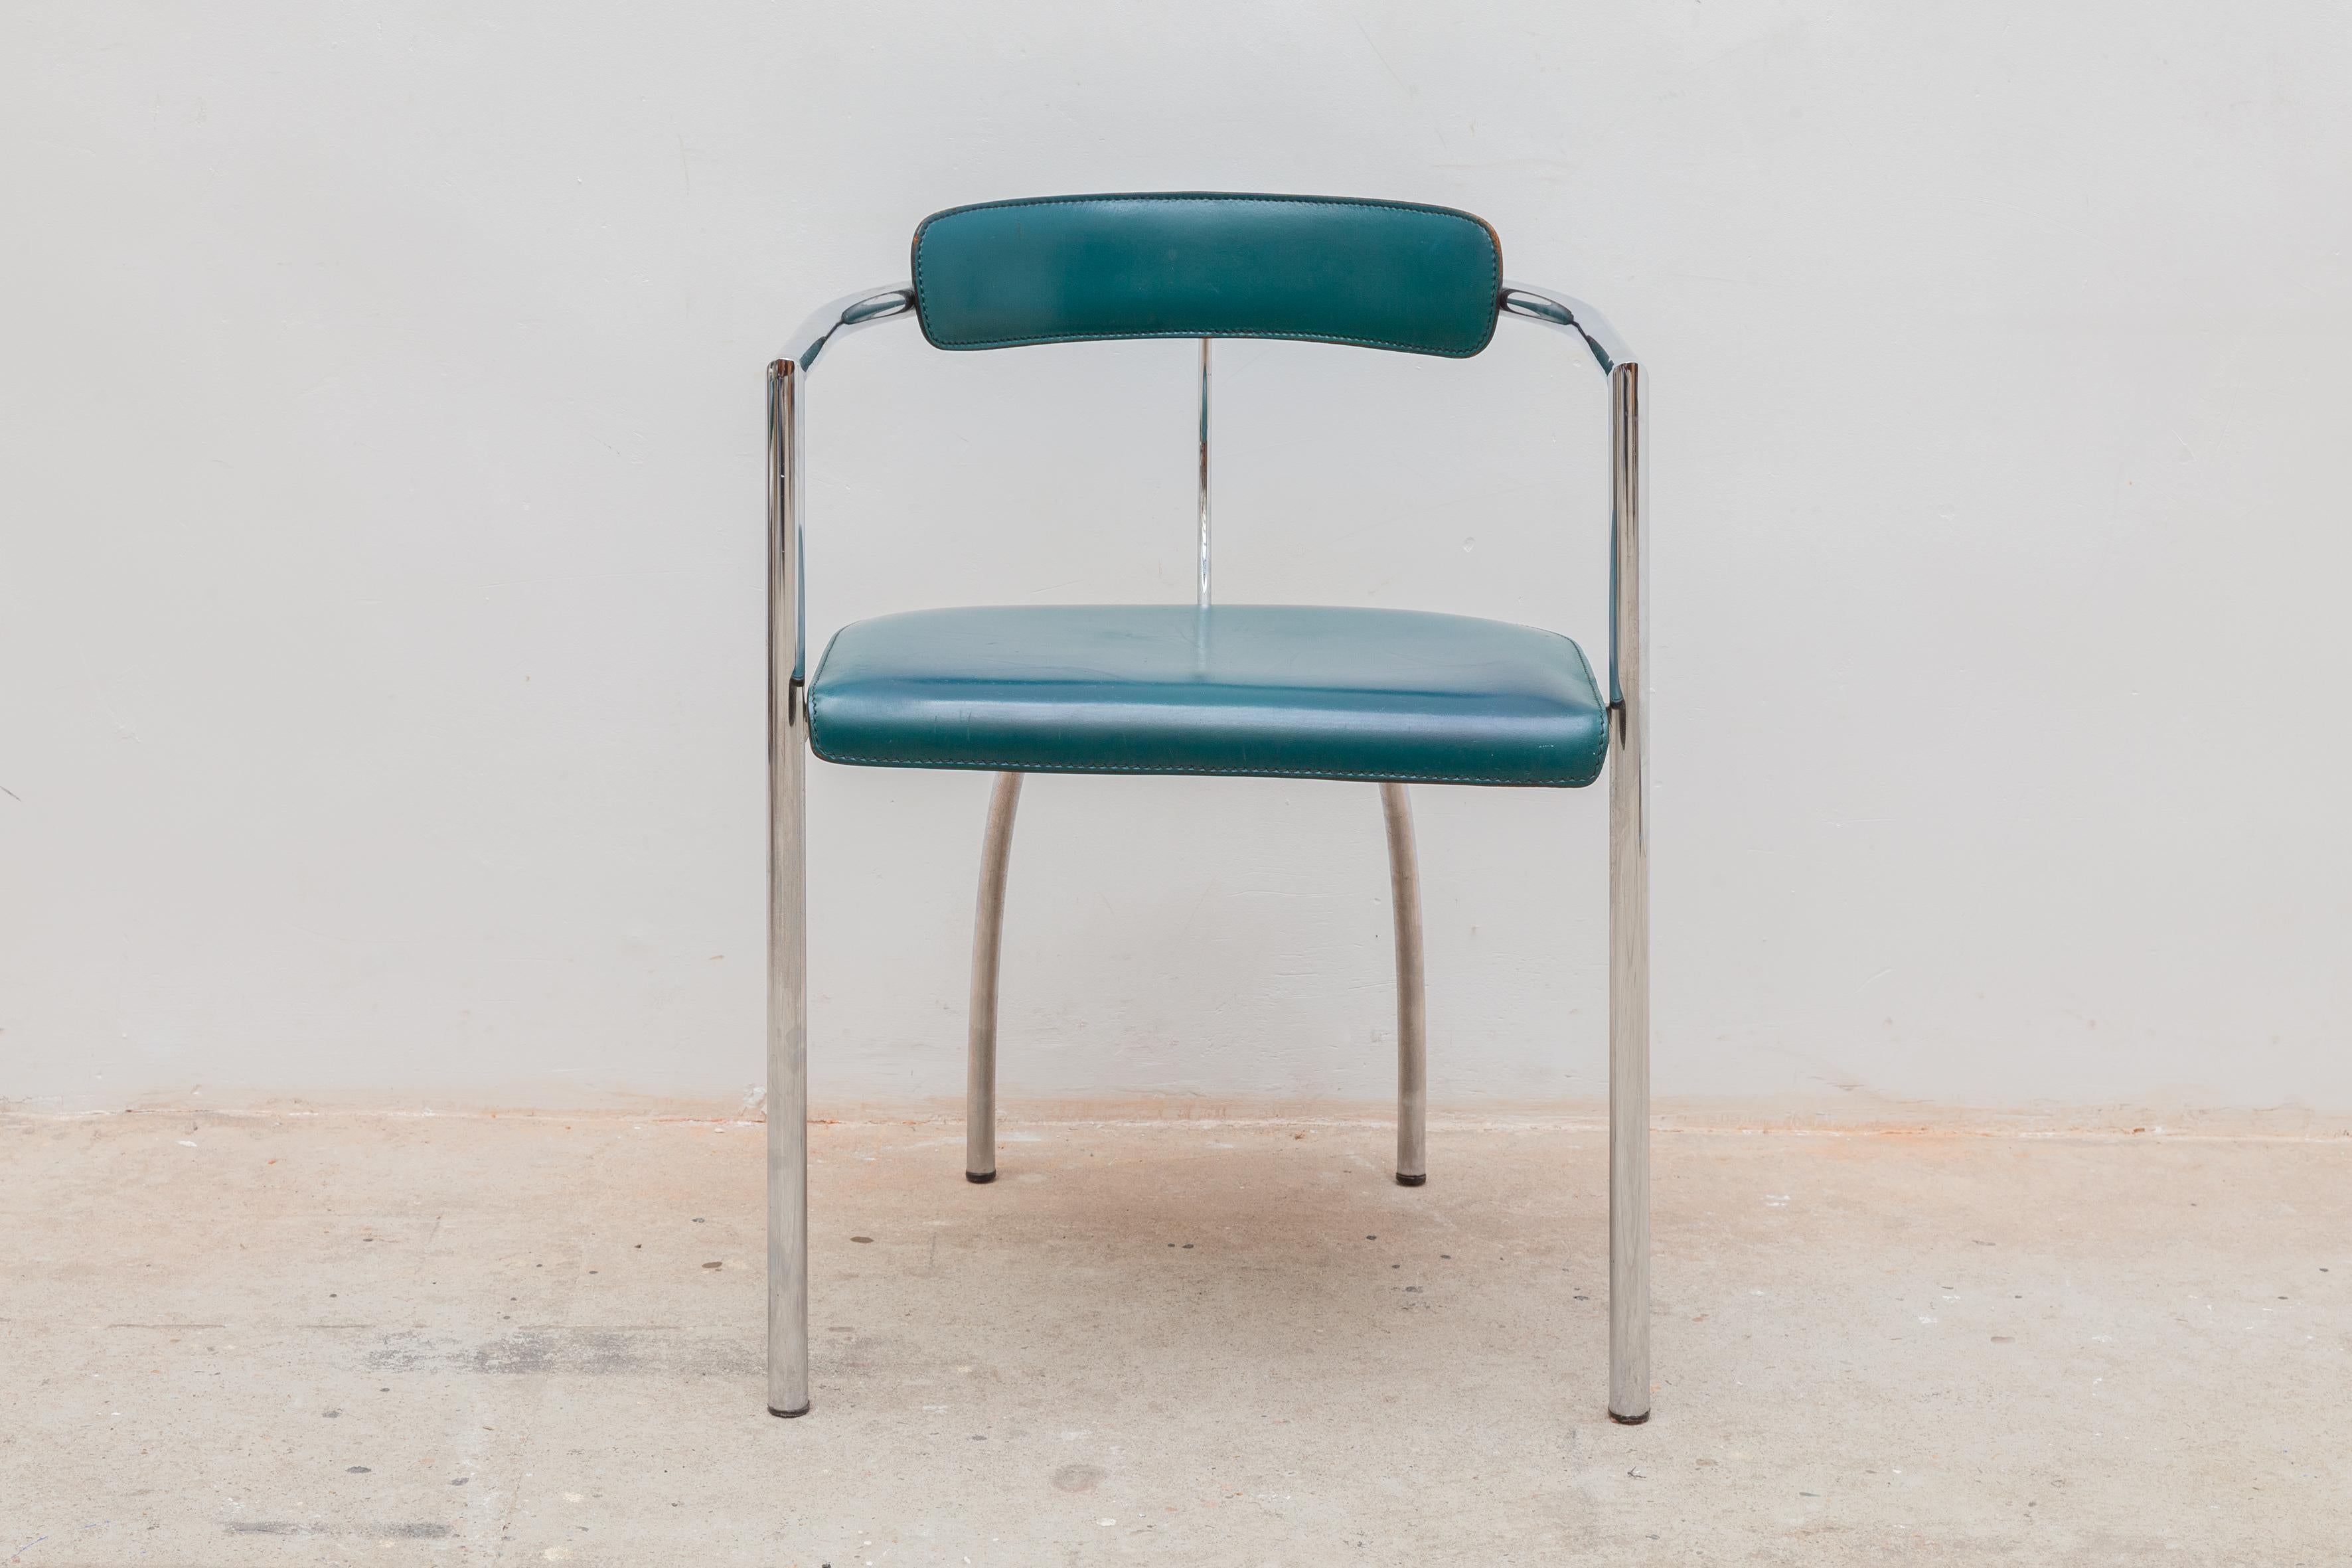 Set of four Italian chromed steel and green leather chairs, 1970s. Arrben leather chairs all four in original good condition, comfortable seat.